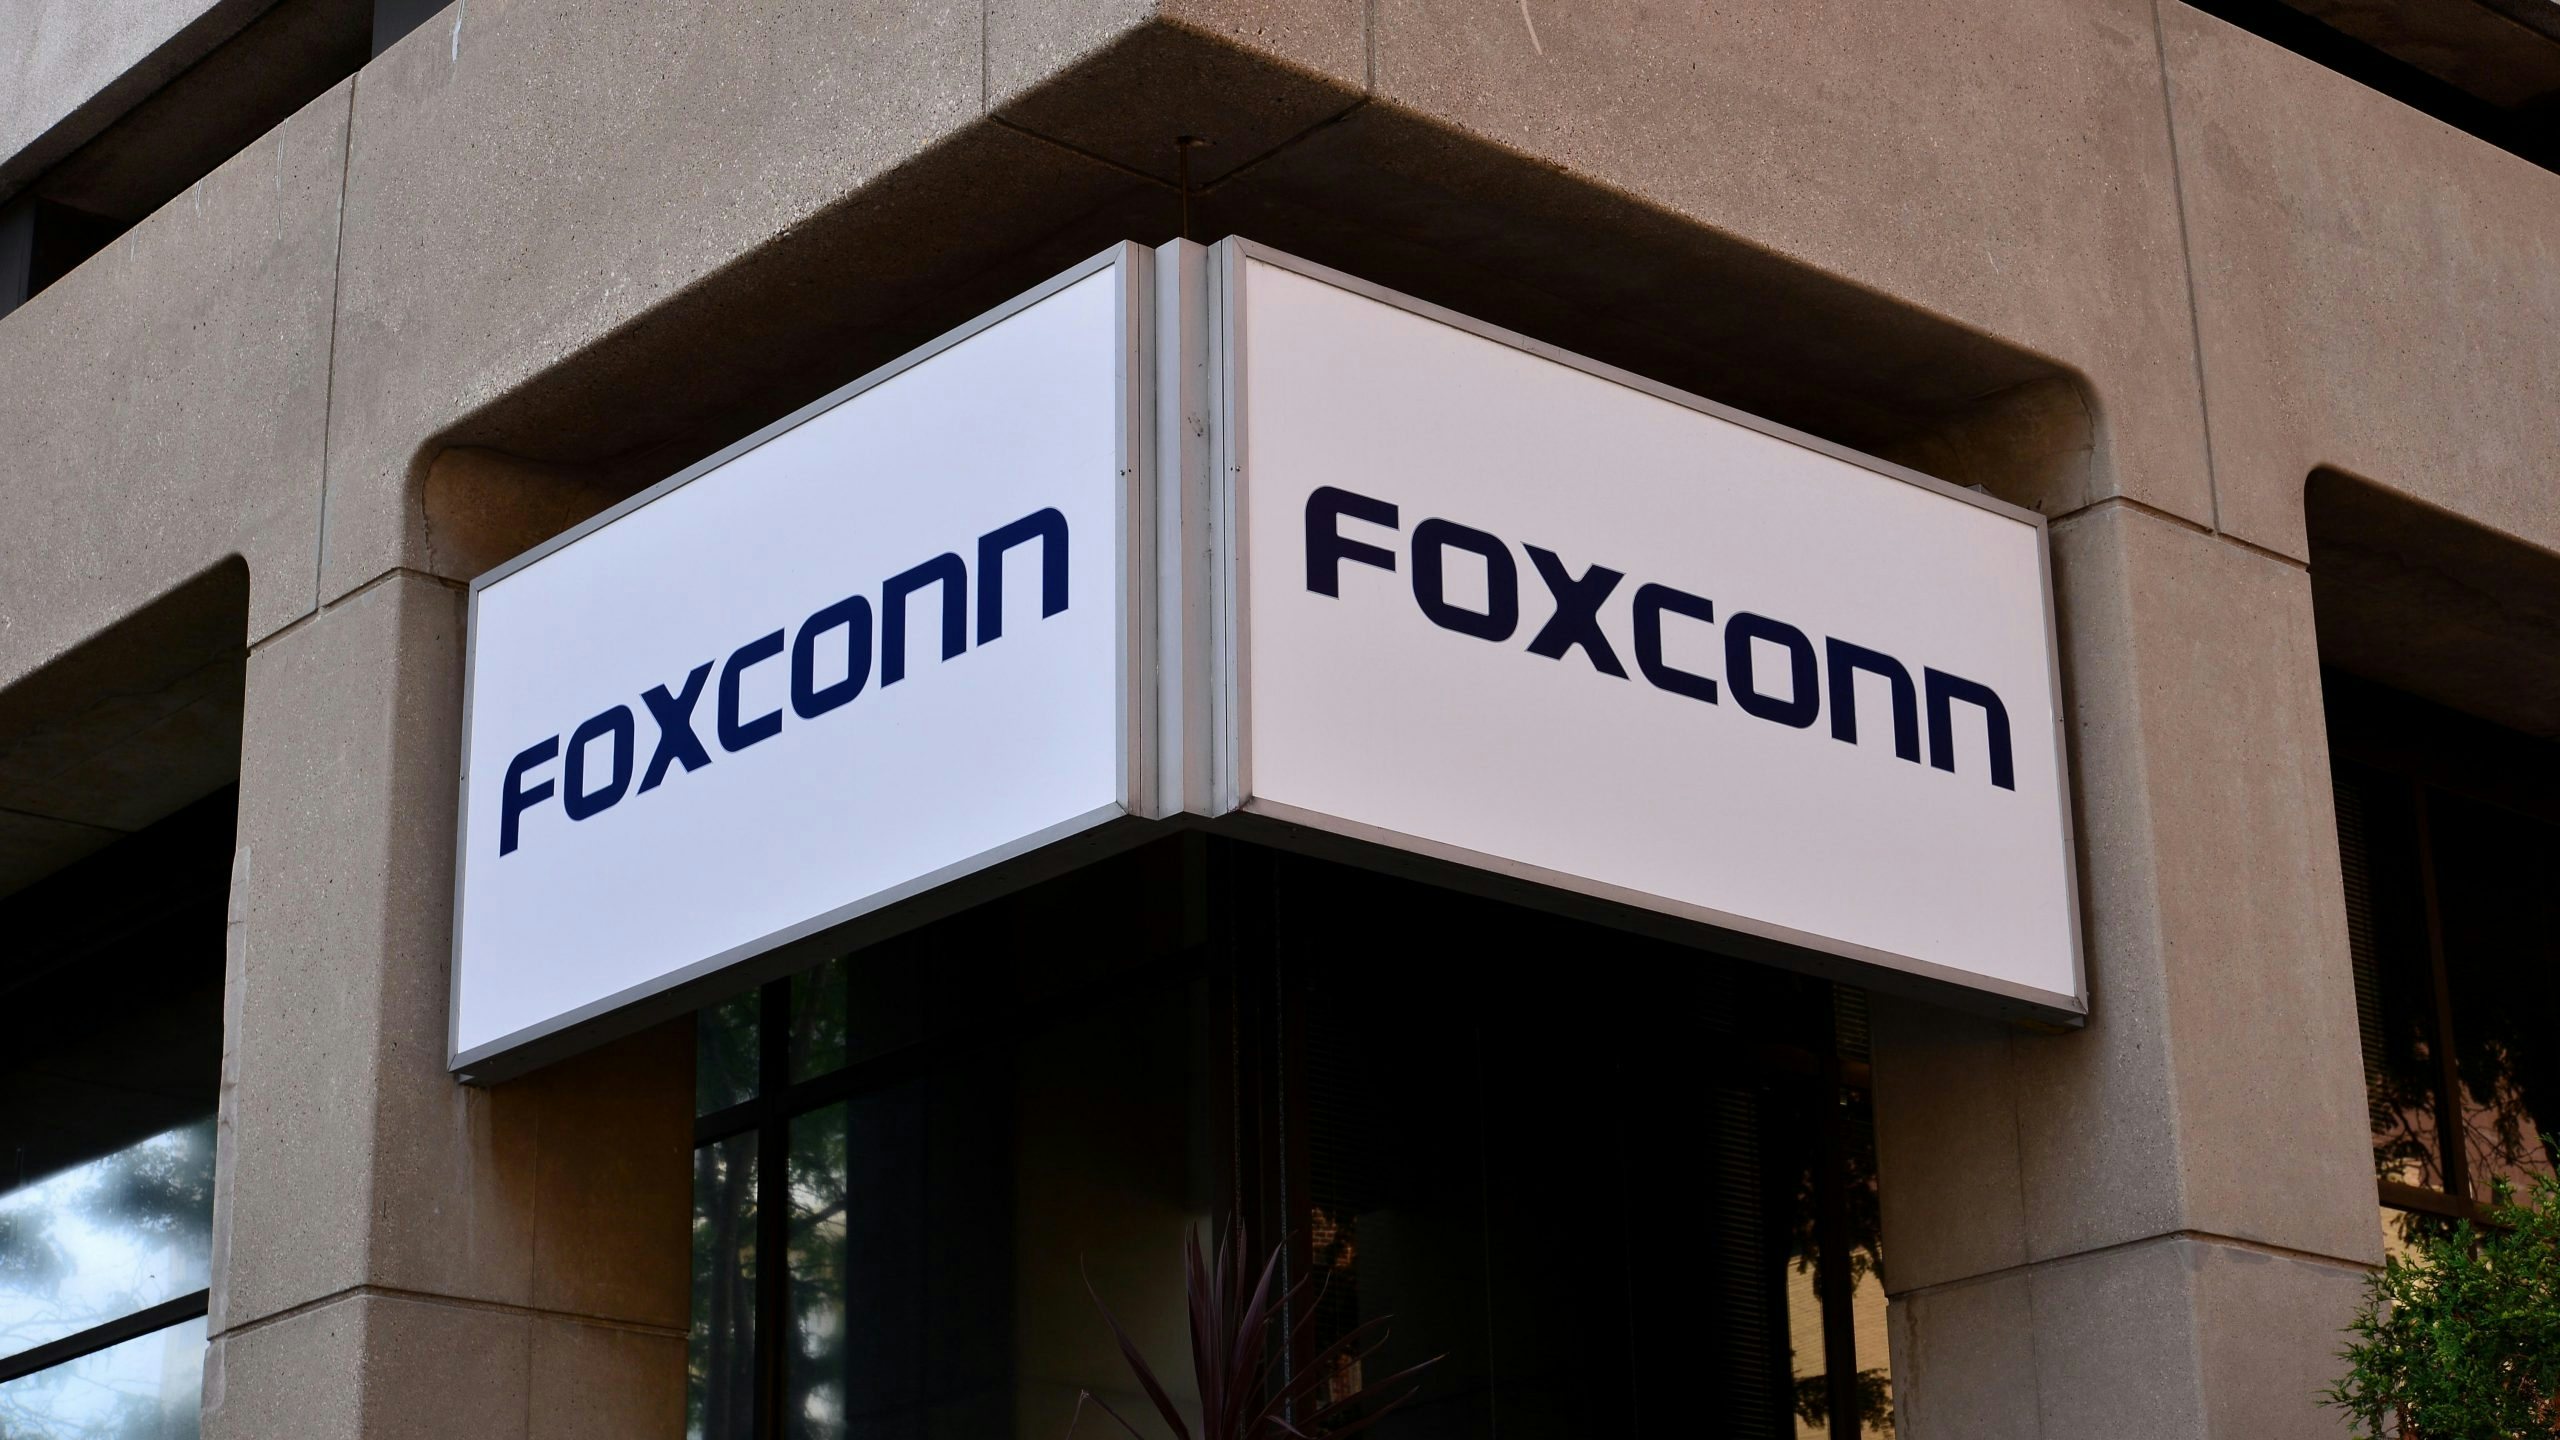 A COVID-19 outbreak at Foxconn’s Zhengzhou plant, which makes iPhones, prompted a mass exodus of workers. What does this mean for China-based supply chains? Photo: Shutterstock